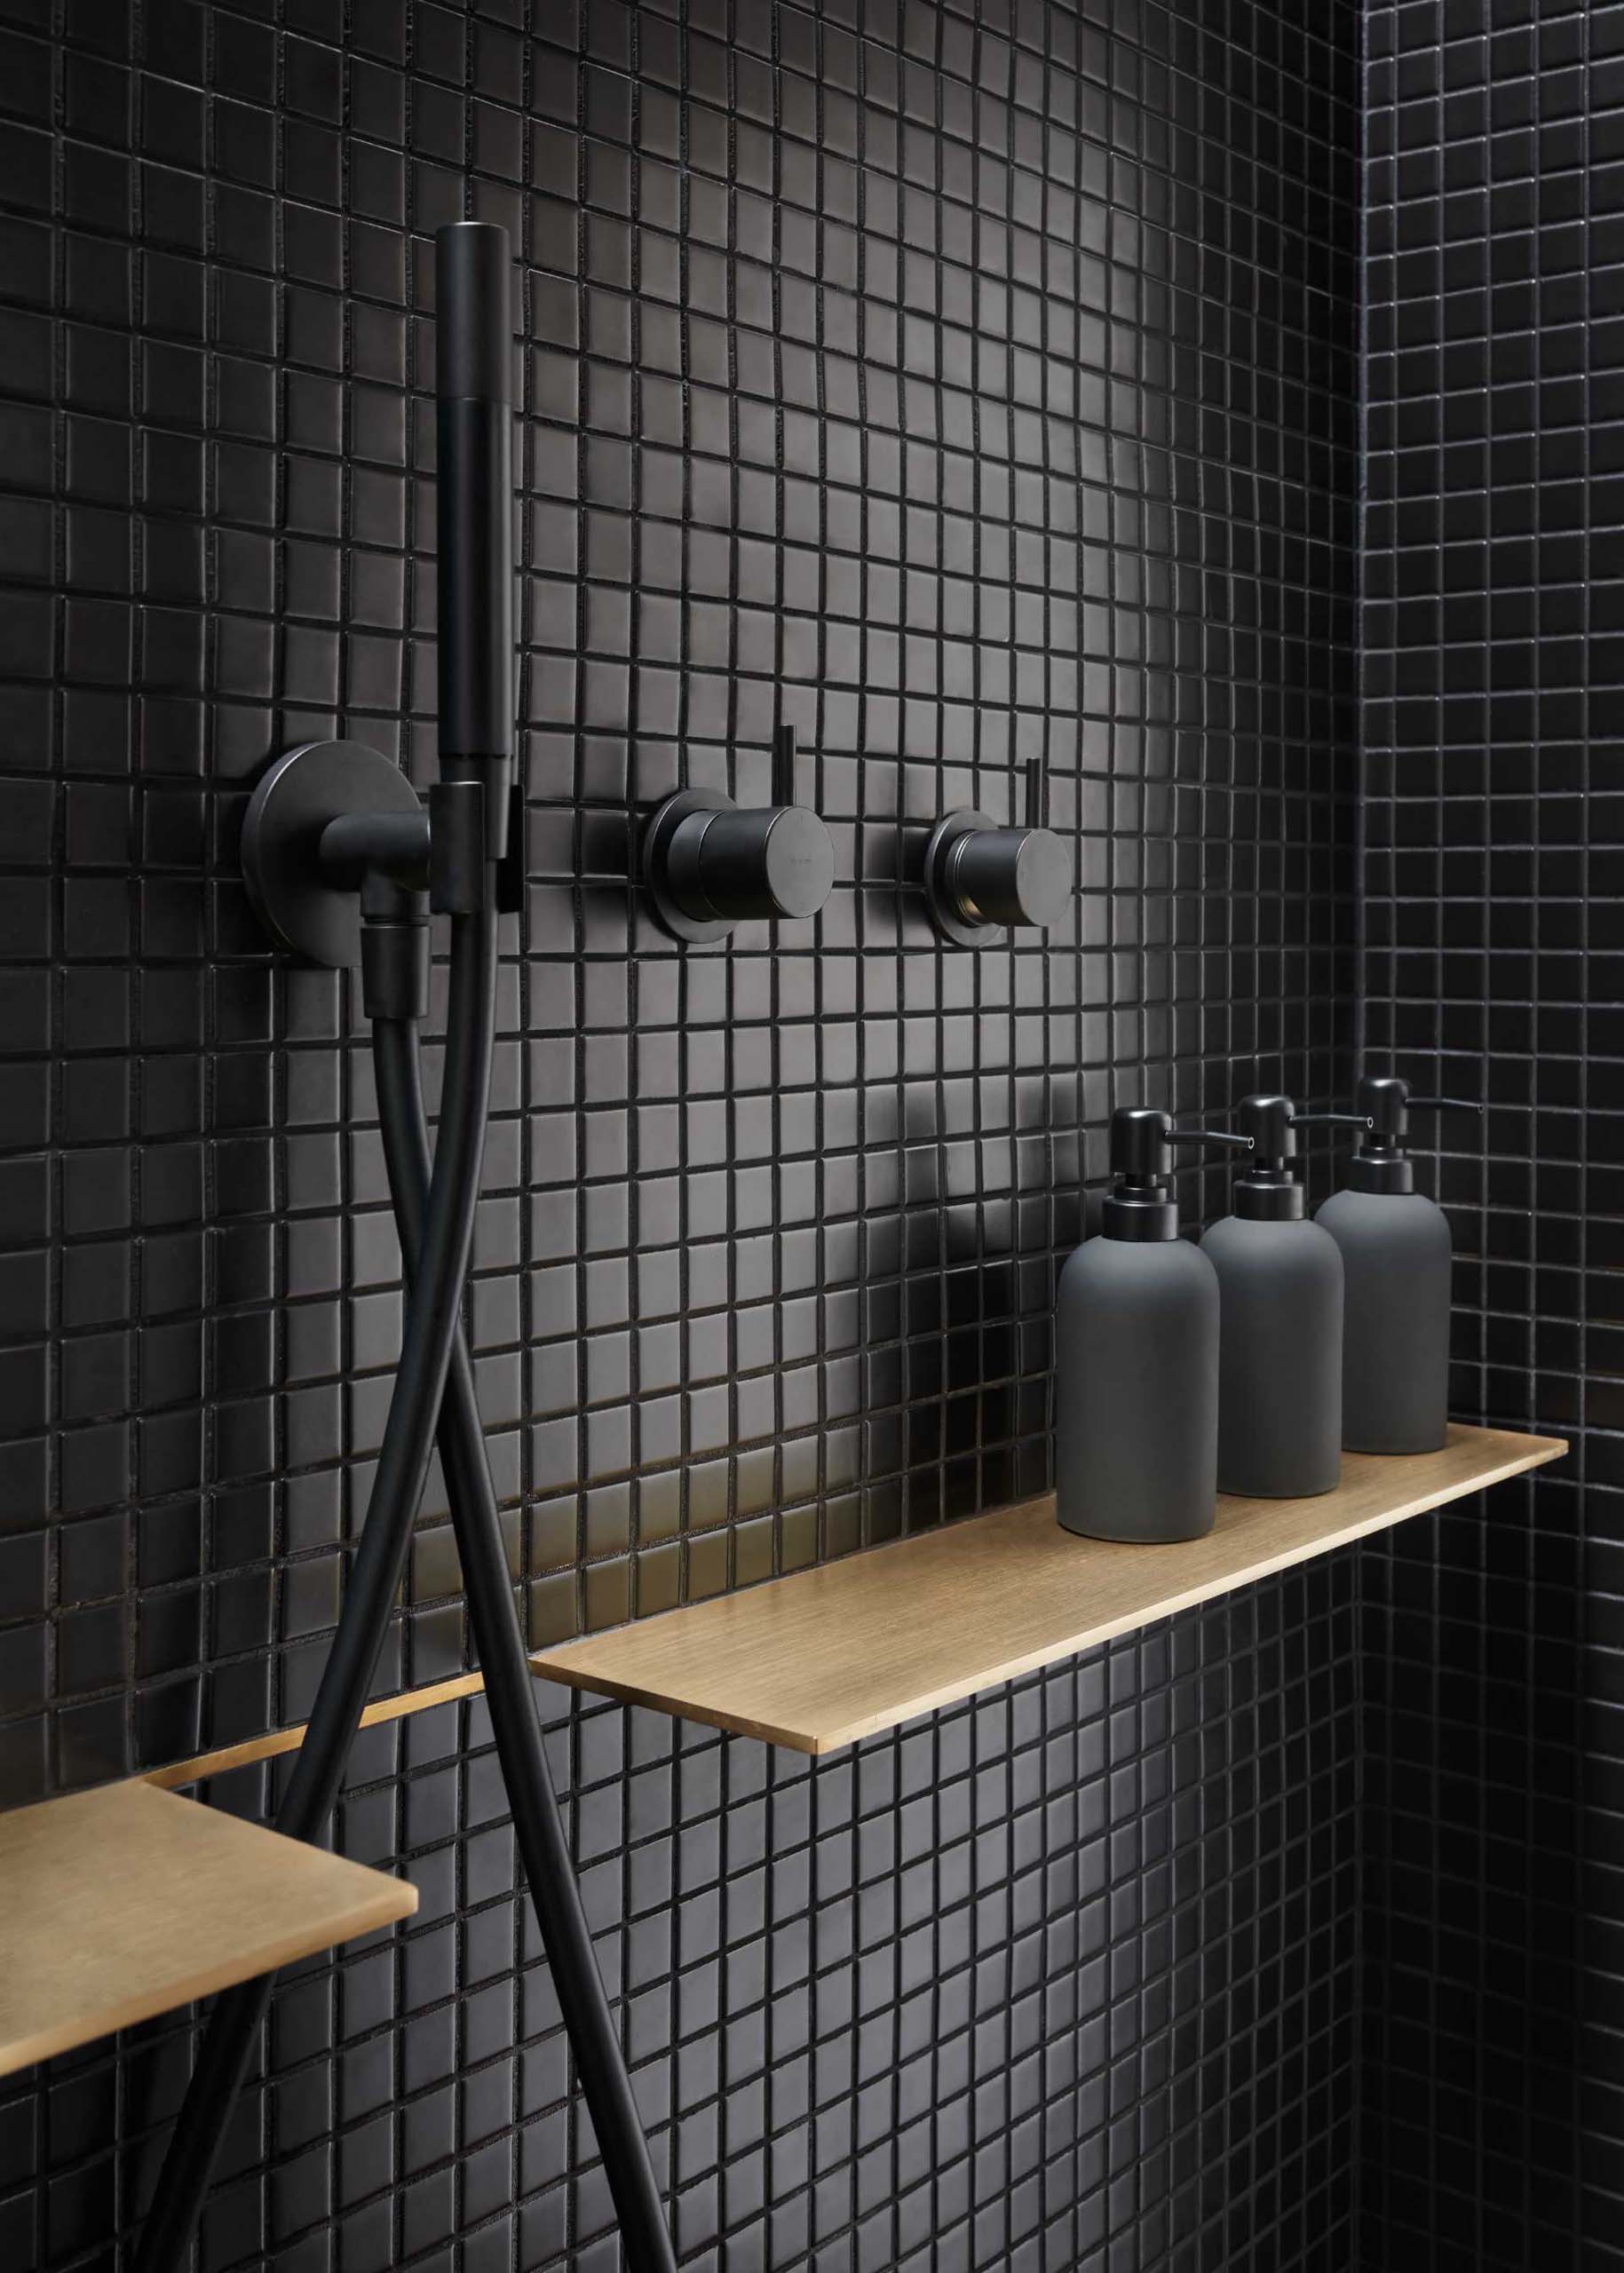 A modern bathroom with matte black plumbing fixtures and black tiles.